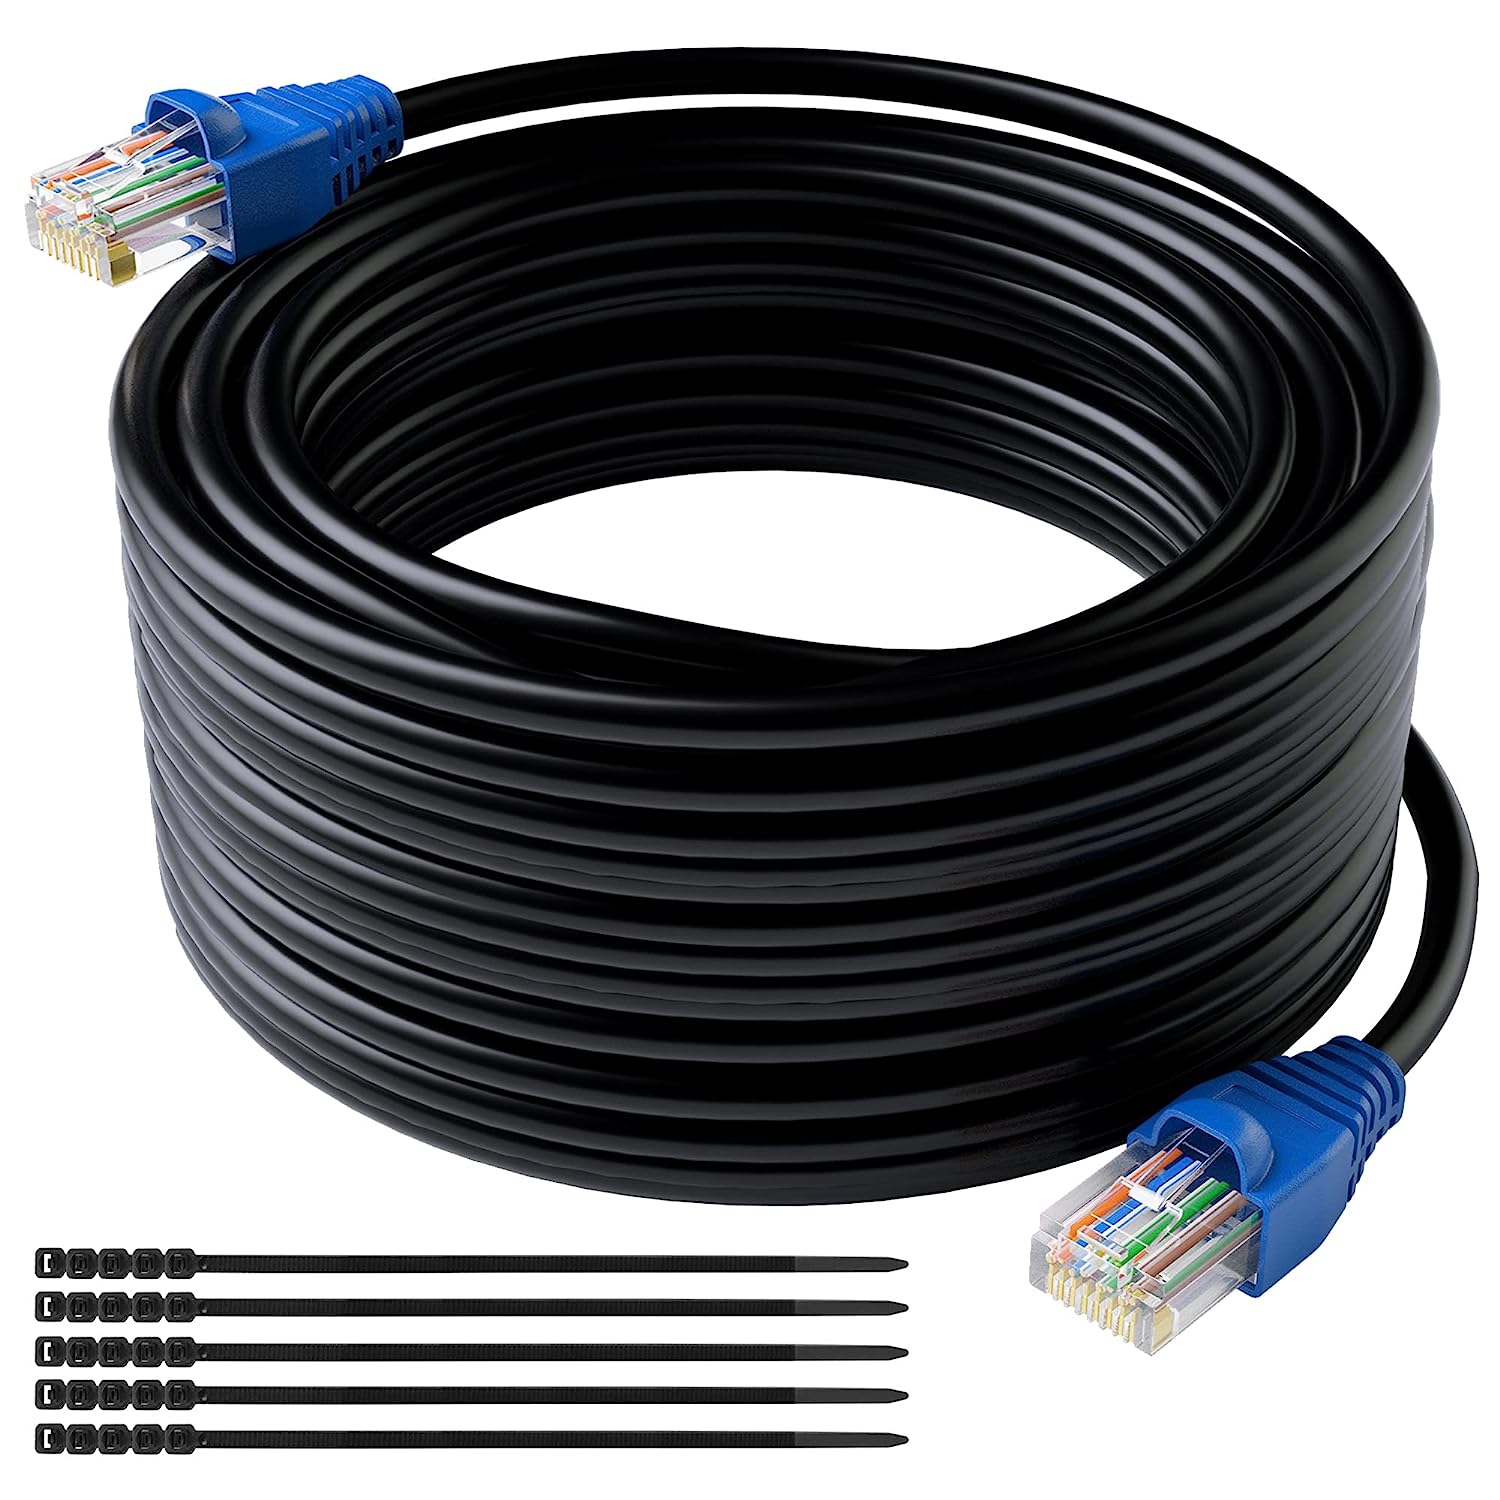 Cat5e Outdoor Ethernet Cable 100 Feet, Cat 5e Heavy [...]